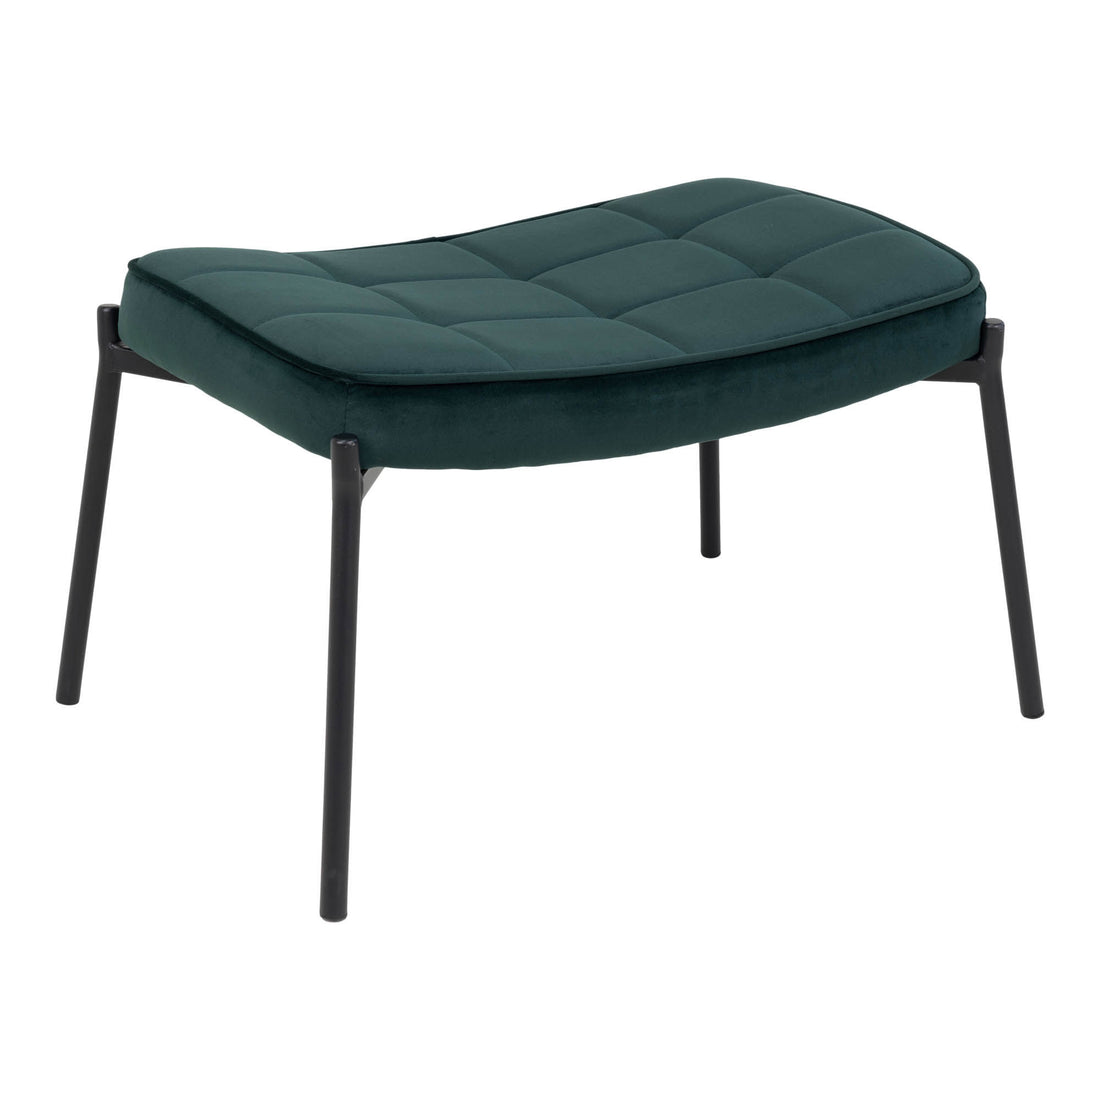 Glasgow footstool - footstool in green velor with black legs - 1 - pcs